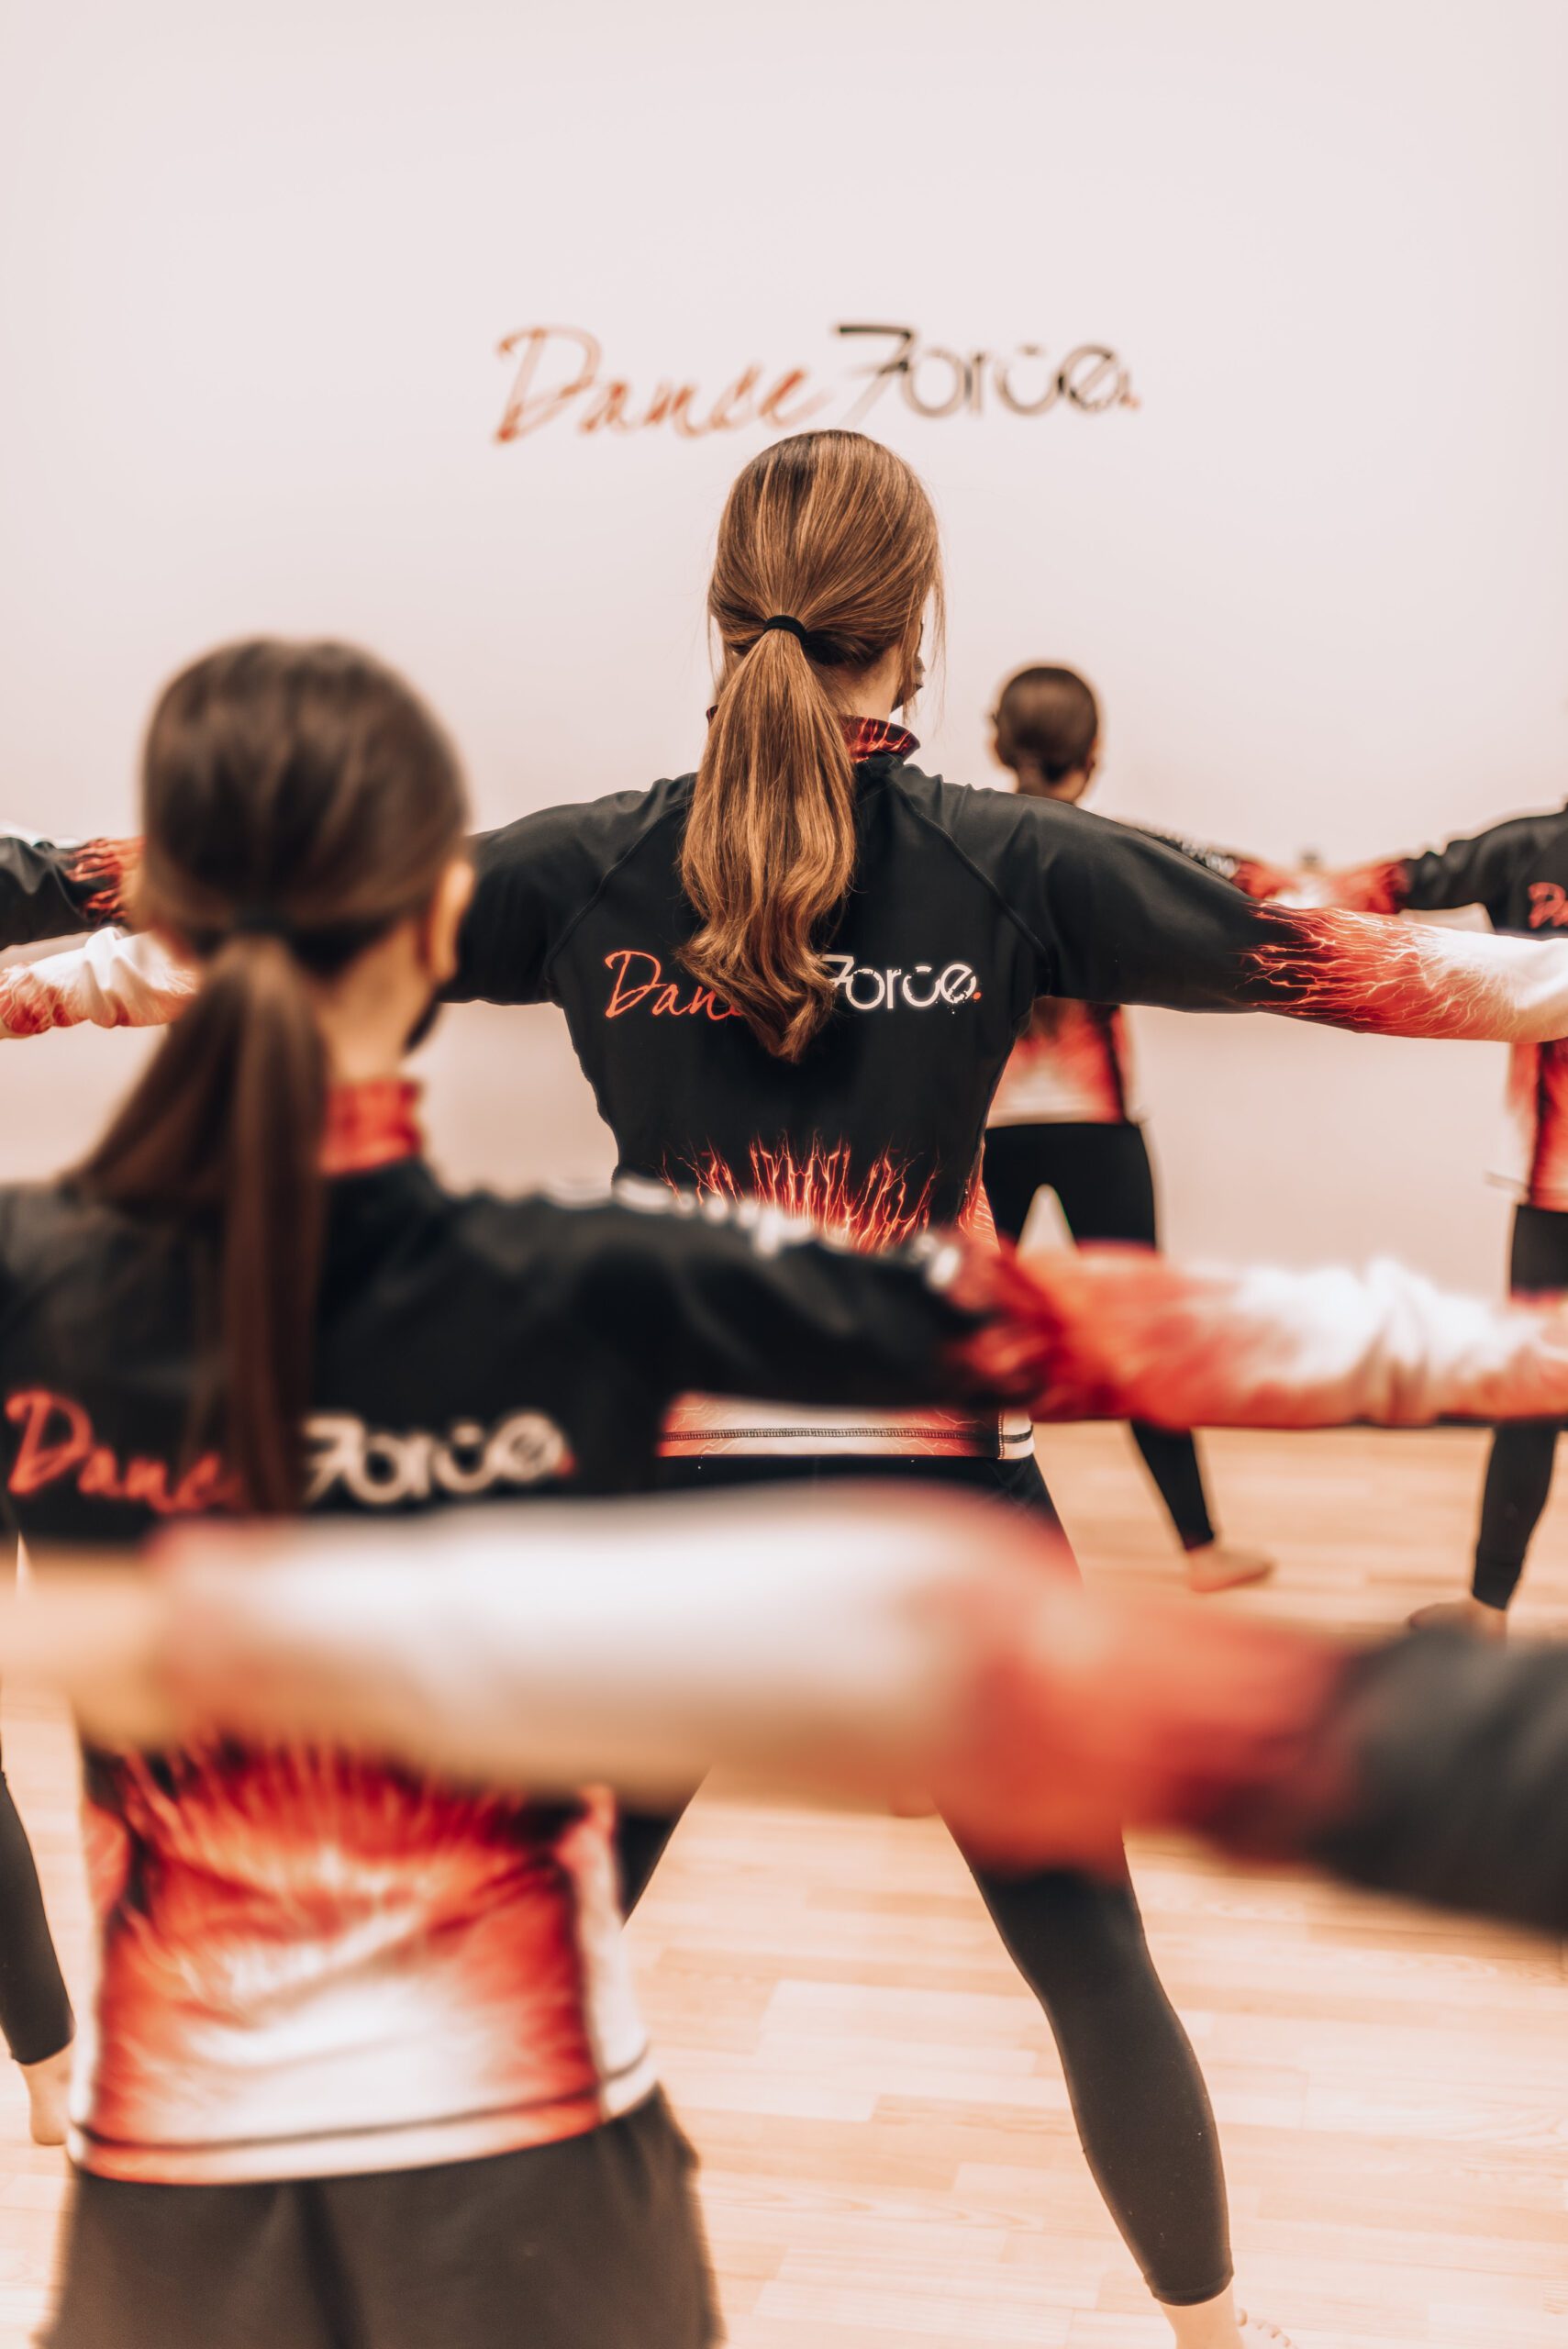 Catering to Diverse Buyer Types: Marketing Custom Team Wear for Dance Studios and Gymnastics Clubs